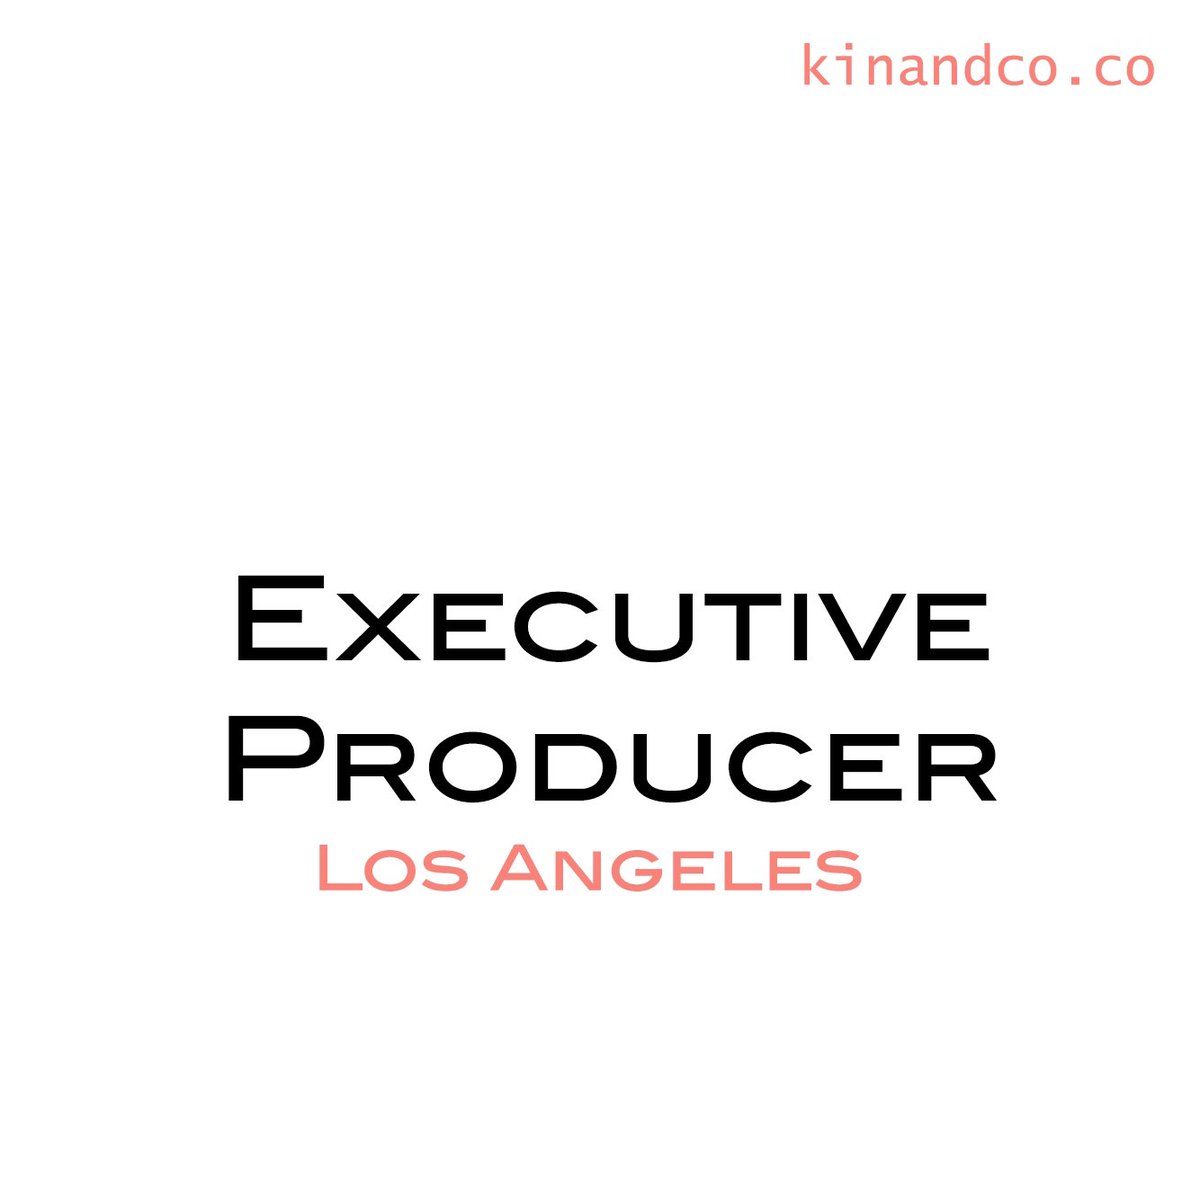 #JOBALERT
Seeking a rockstar Executive Producer for an events agency in LA! Must be LA-based and have big budget major events experience across conferences, festivals, sport, and live events!

#ApplyNow at kinandco.co

#newrole #nowhiring #jobs #losangeles #eventjobs